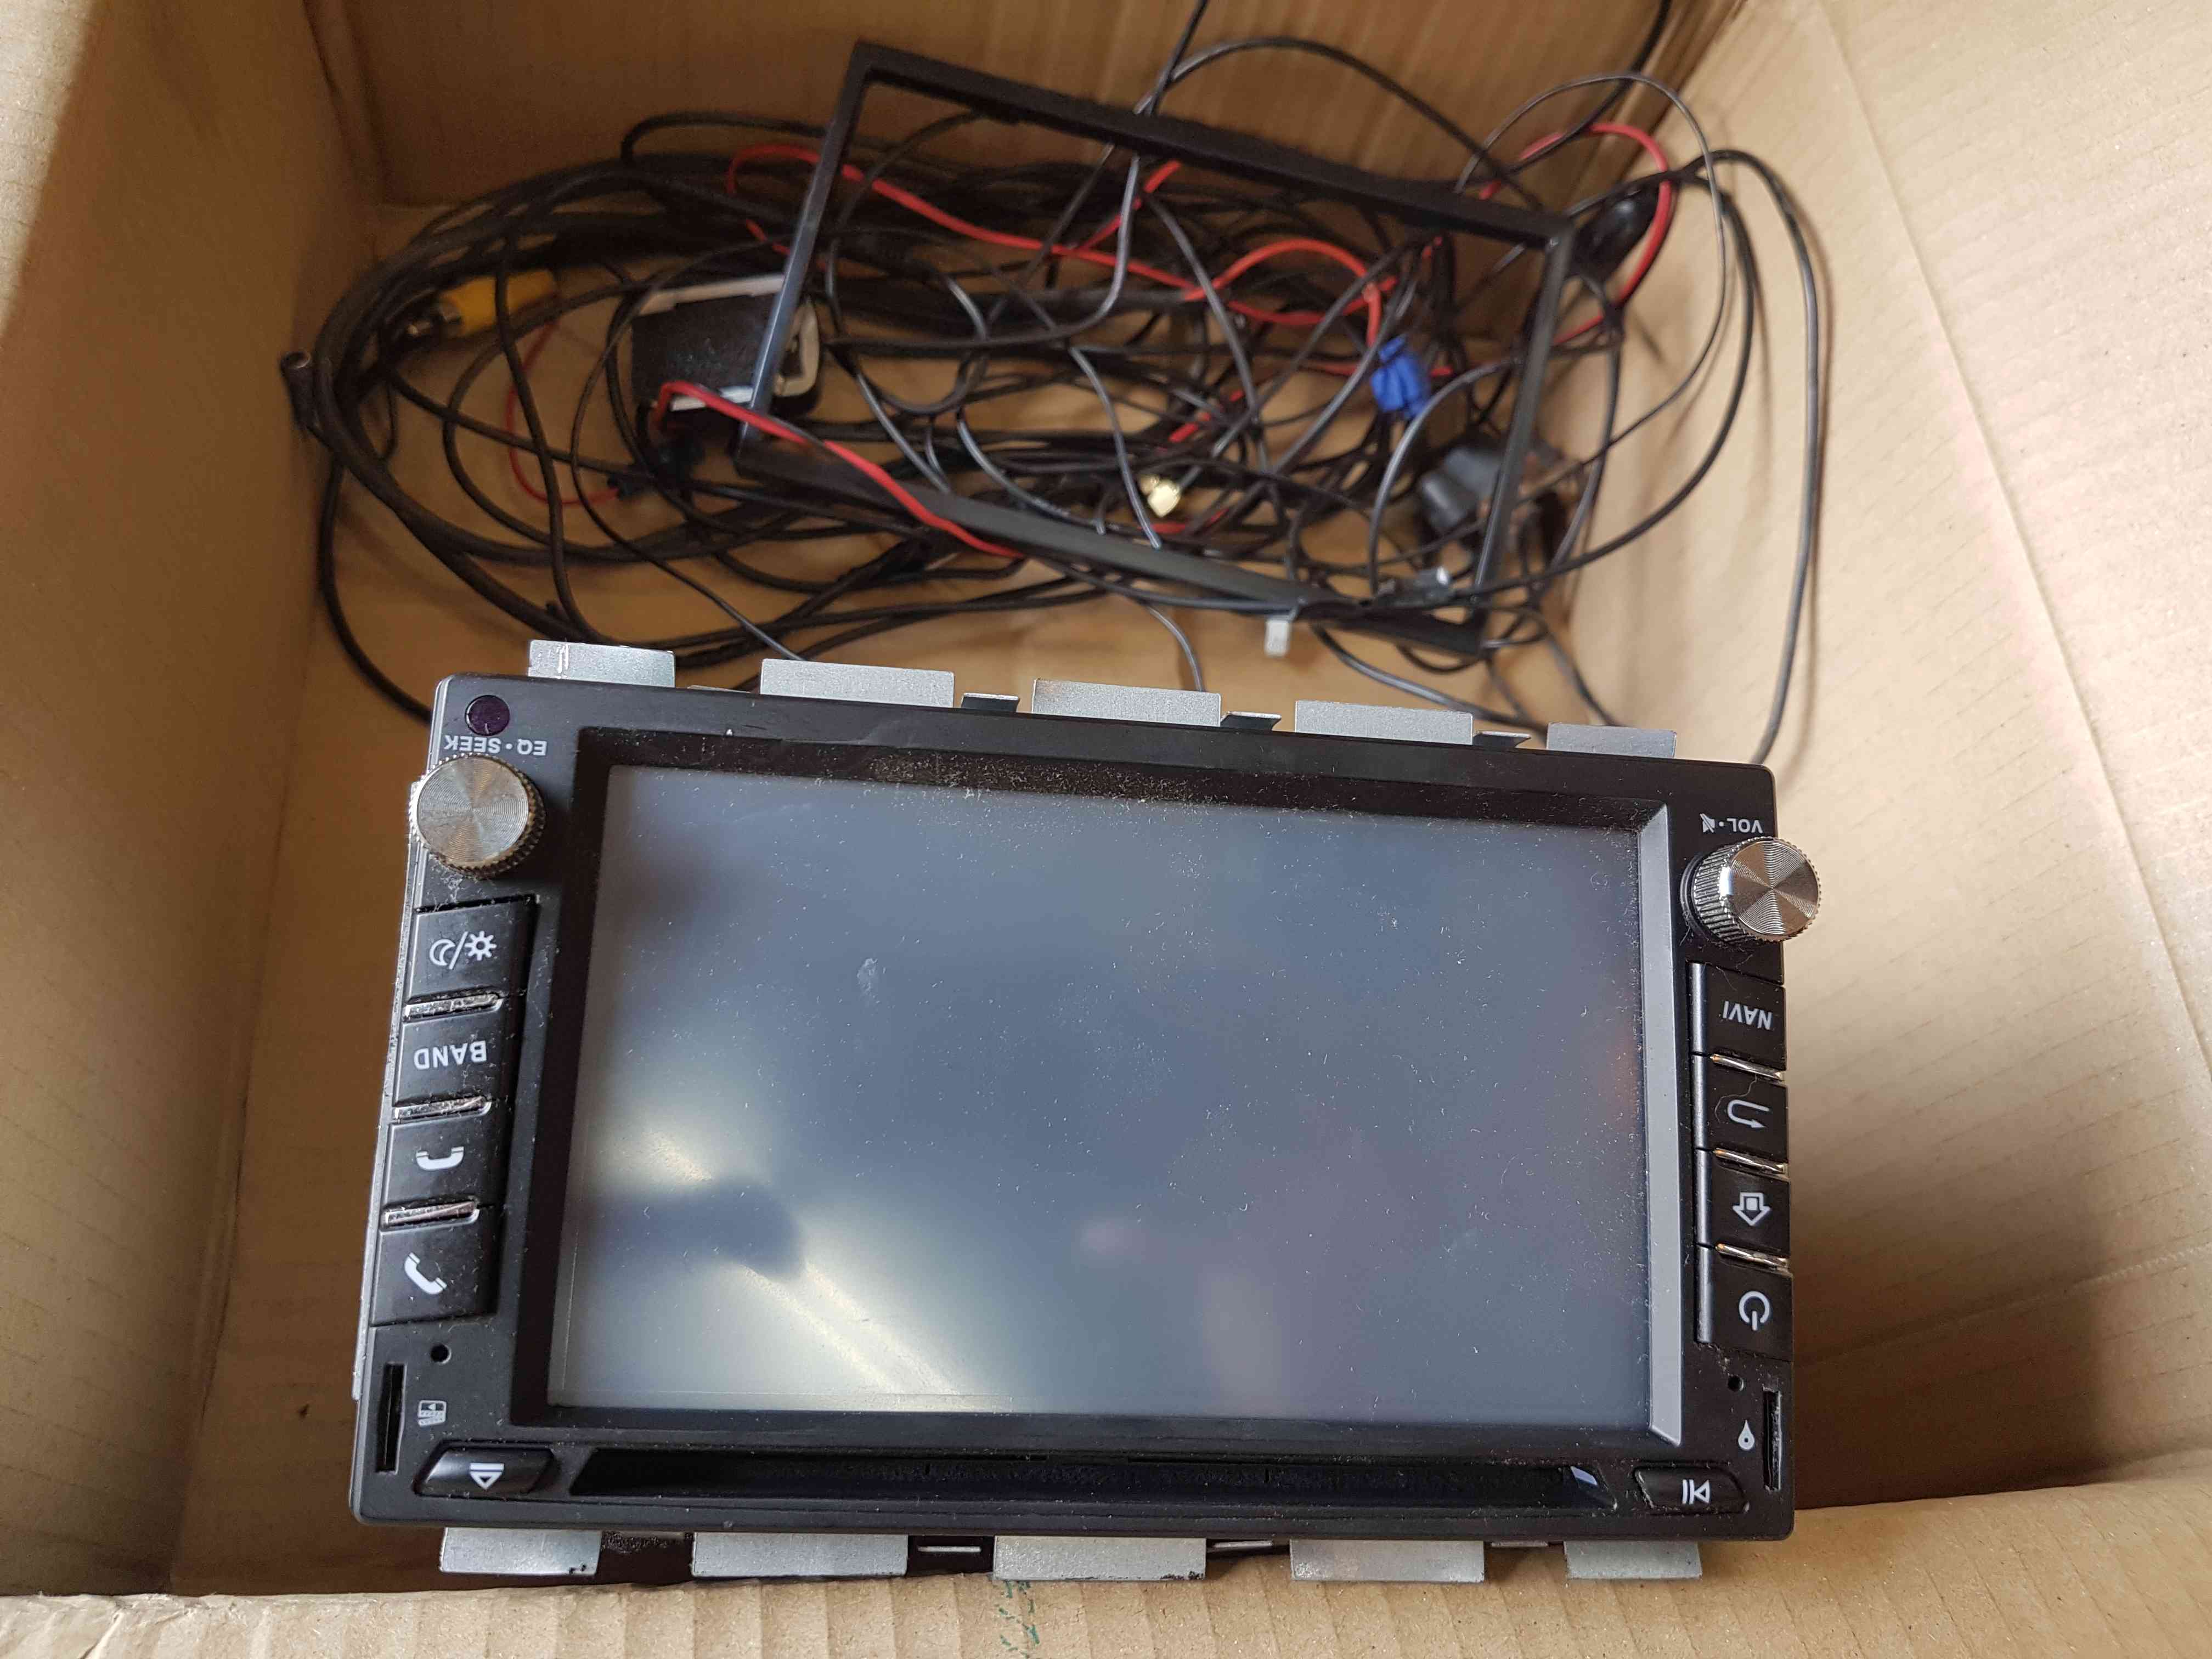 Renault Laguna 2001-2005 Aftermarket Cd Player With Reverse Camera